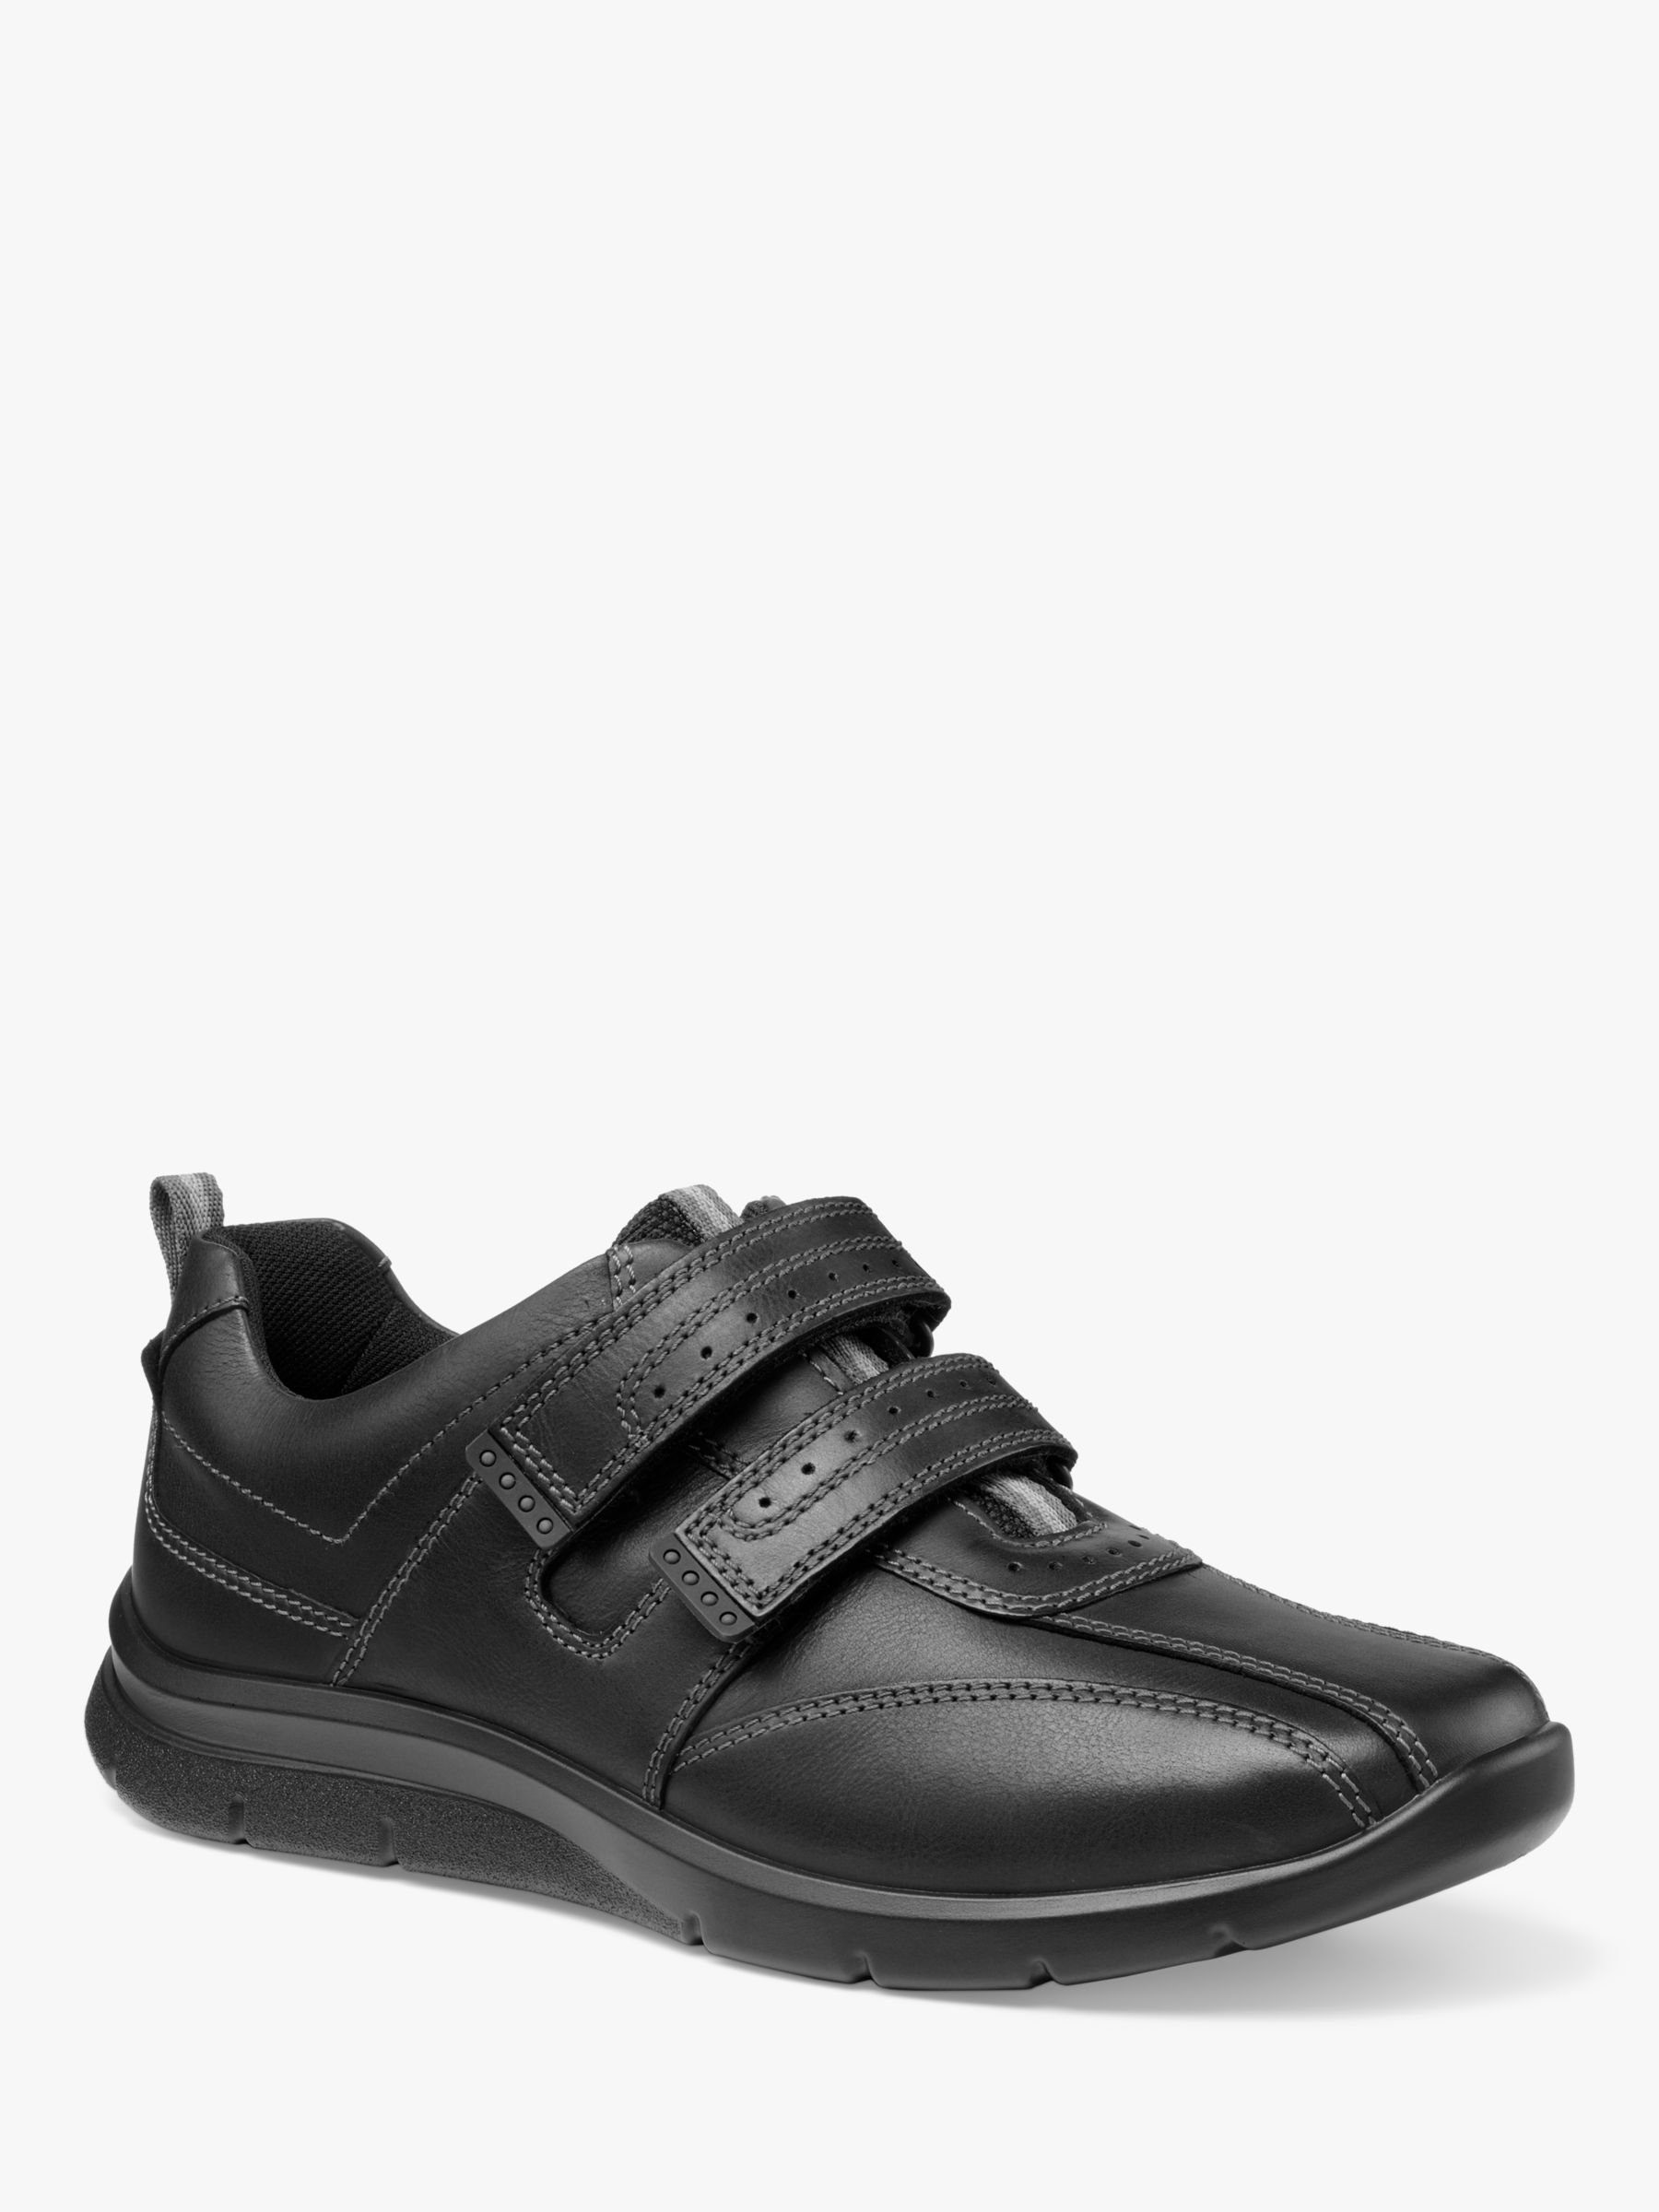 Hotter Energise Classic Mid-Cut Shoes, Black, 6